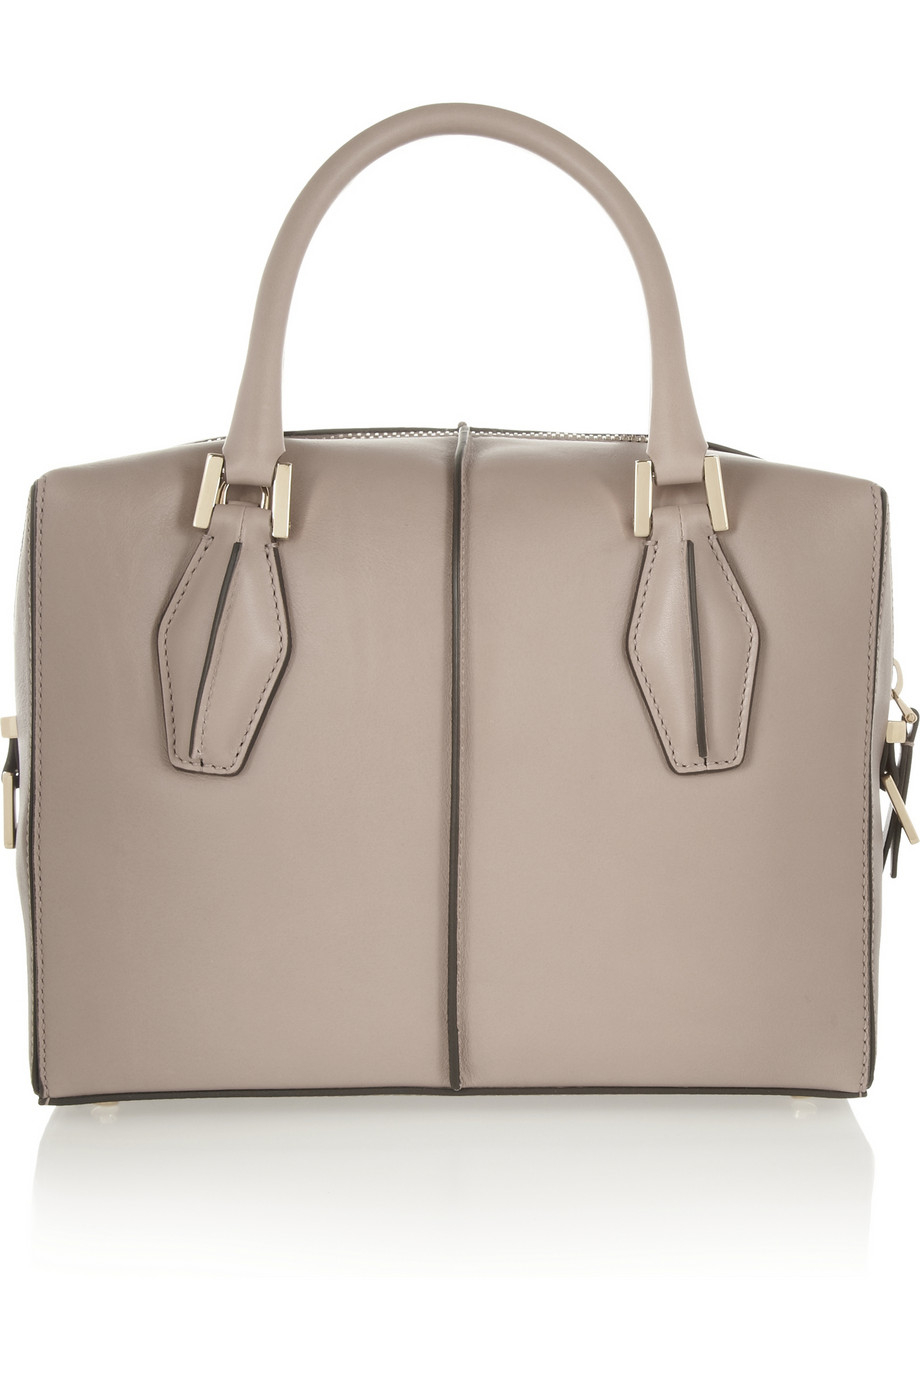 Tod's Dcube Bauletto Medium Leather Tote in Gray - Lyst